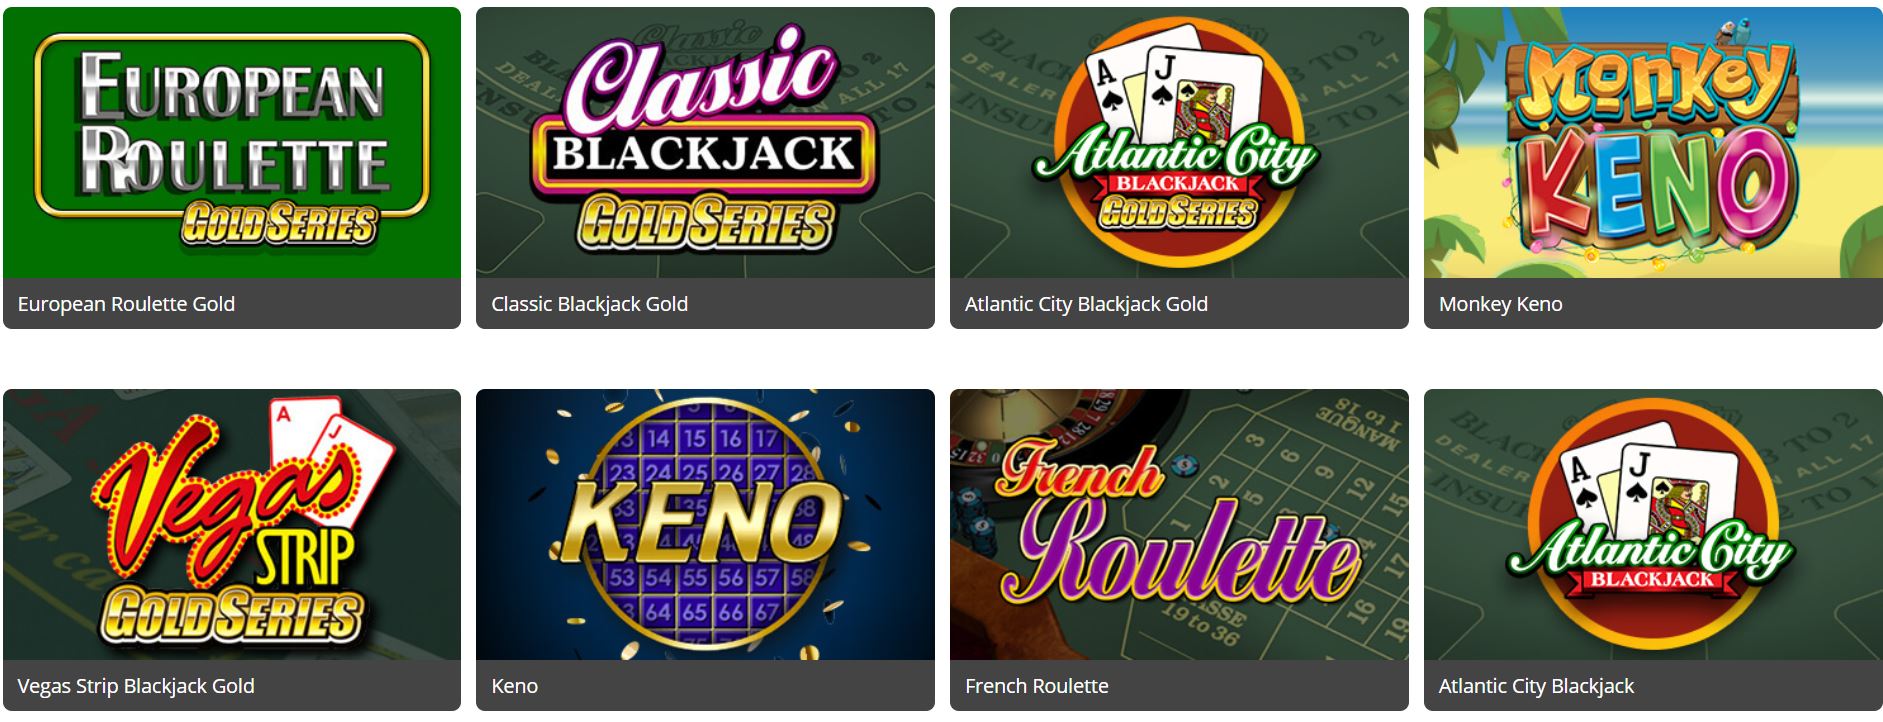 The variety of games on this gambling site is very wide.